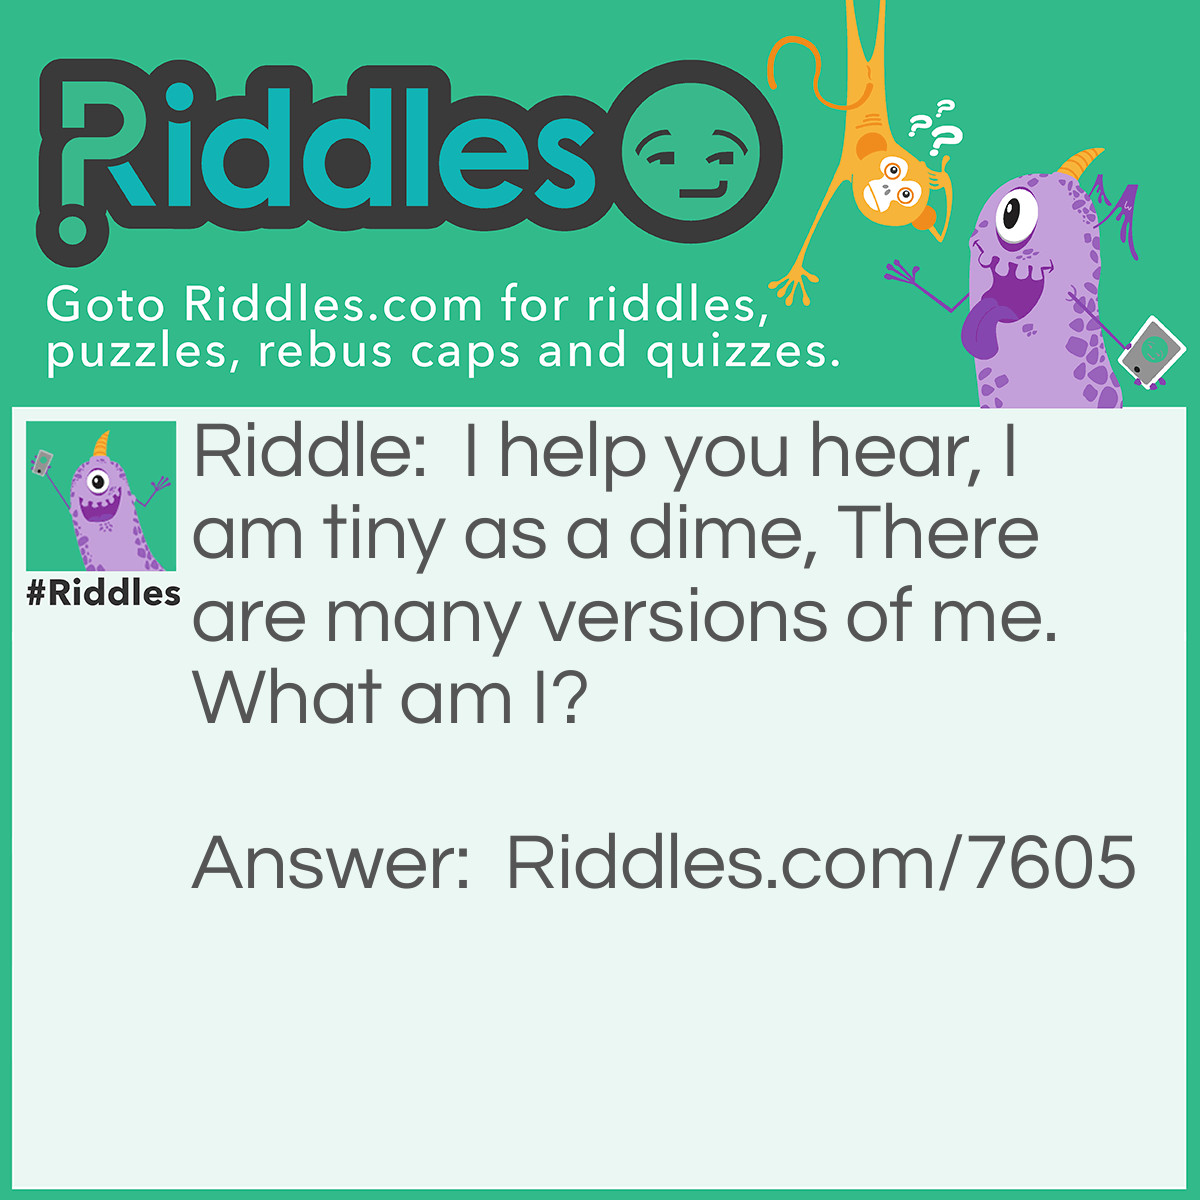 Riddle: I help you hear, I am tiny as a dime, There are many versions of me. What am I? Answer: A Hearing Aid!